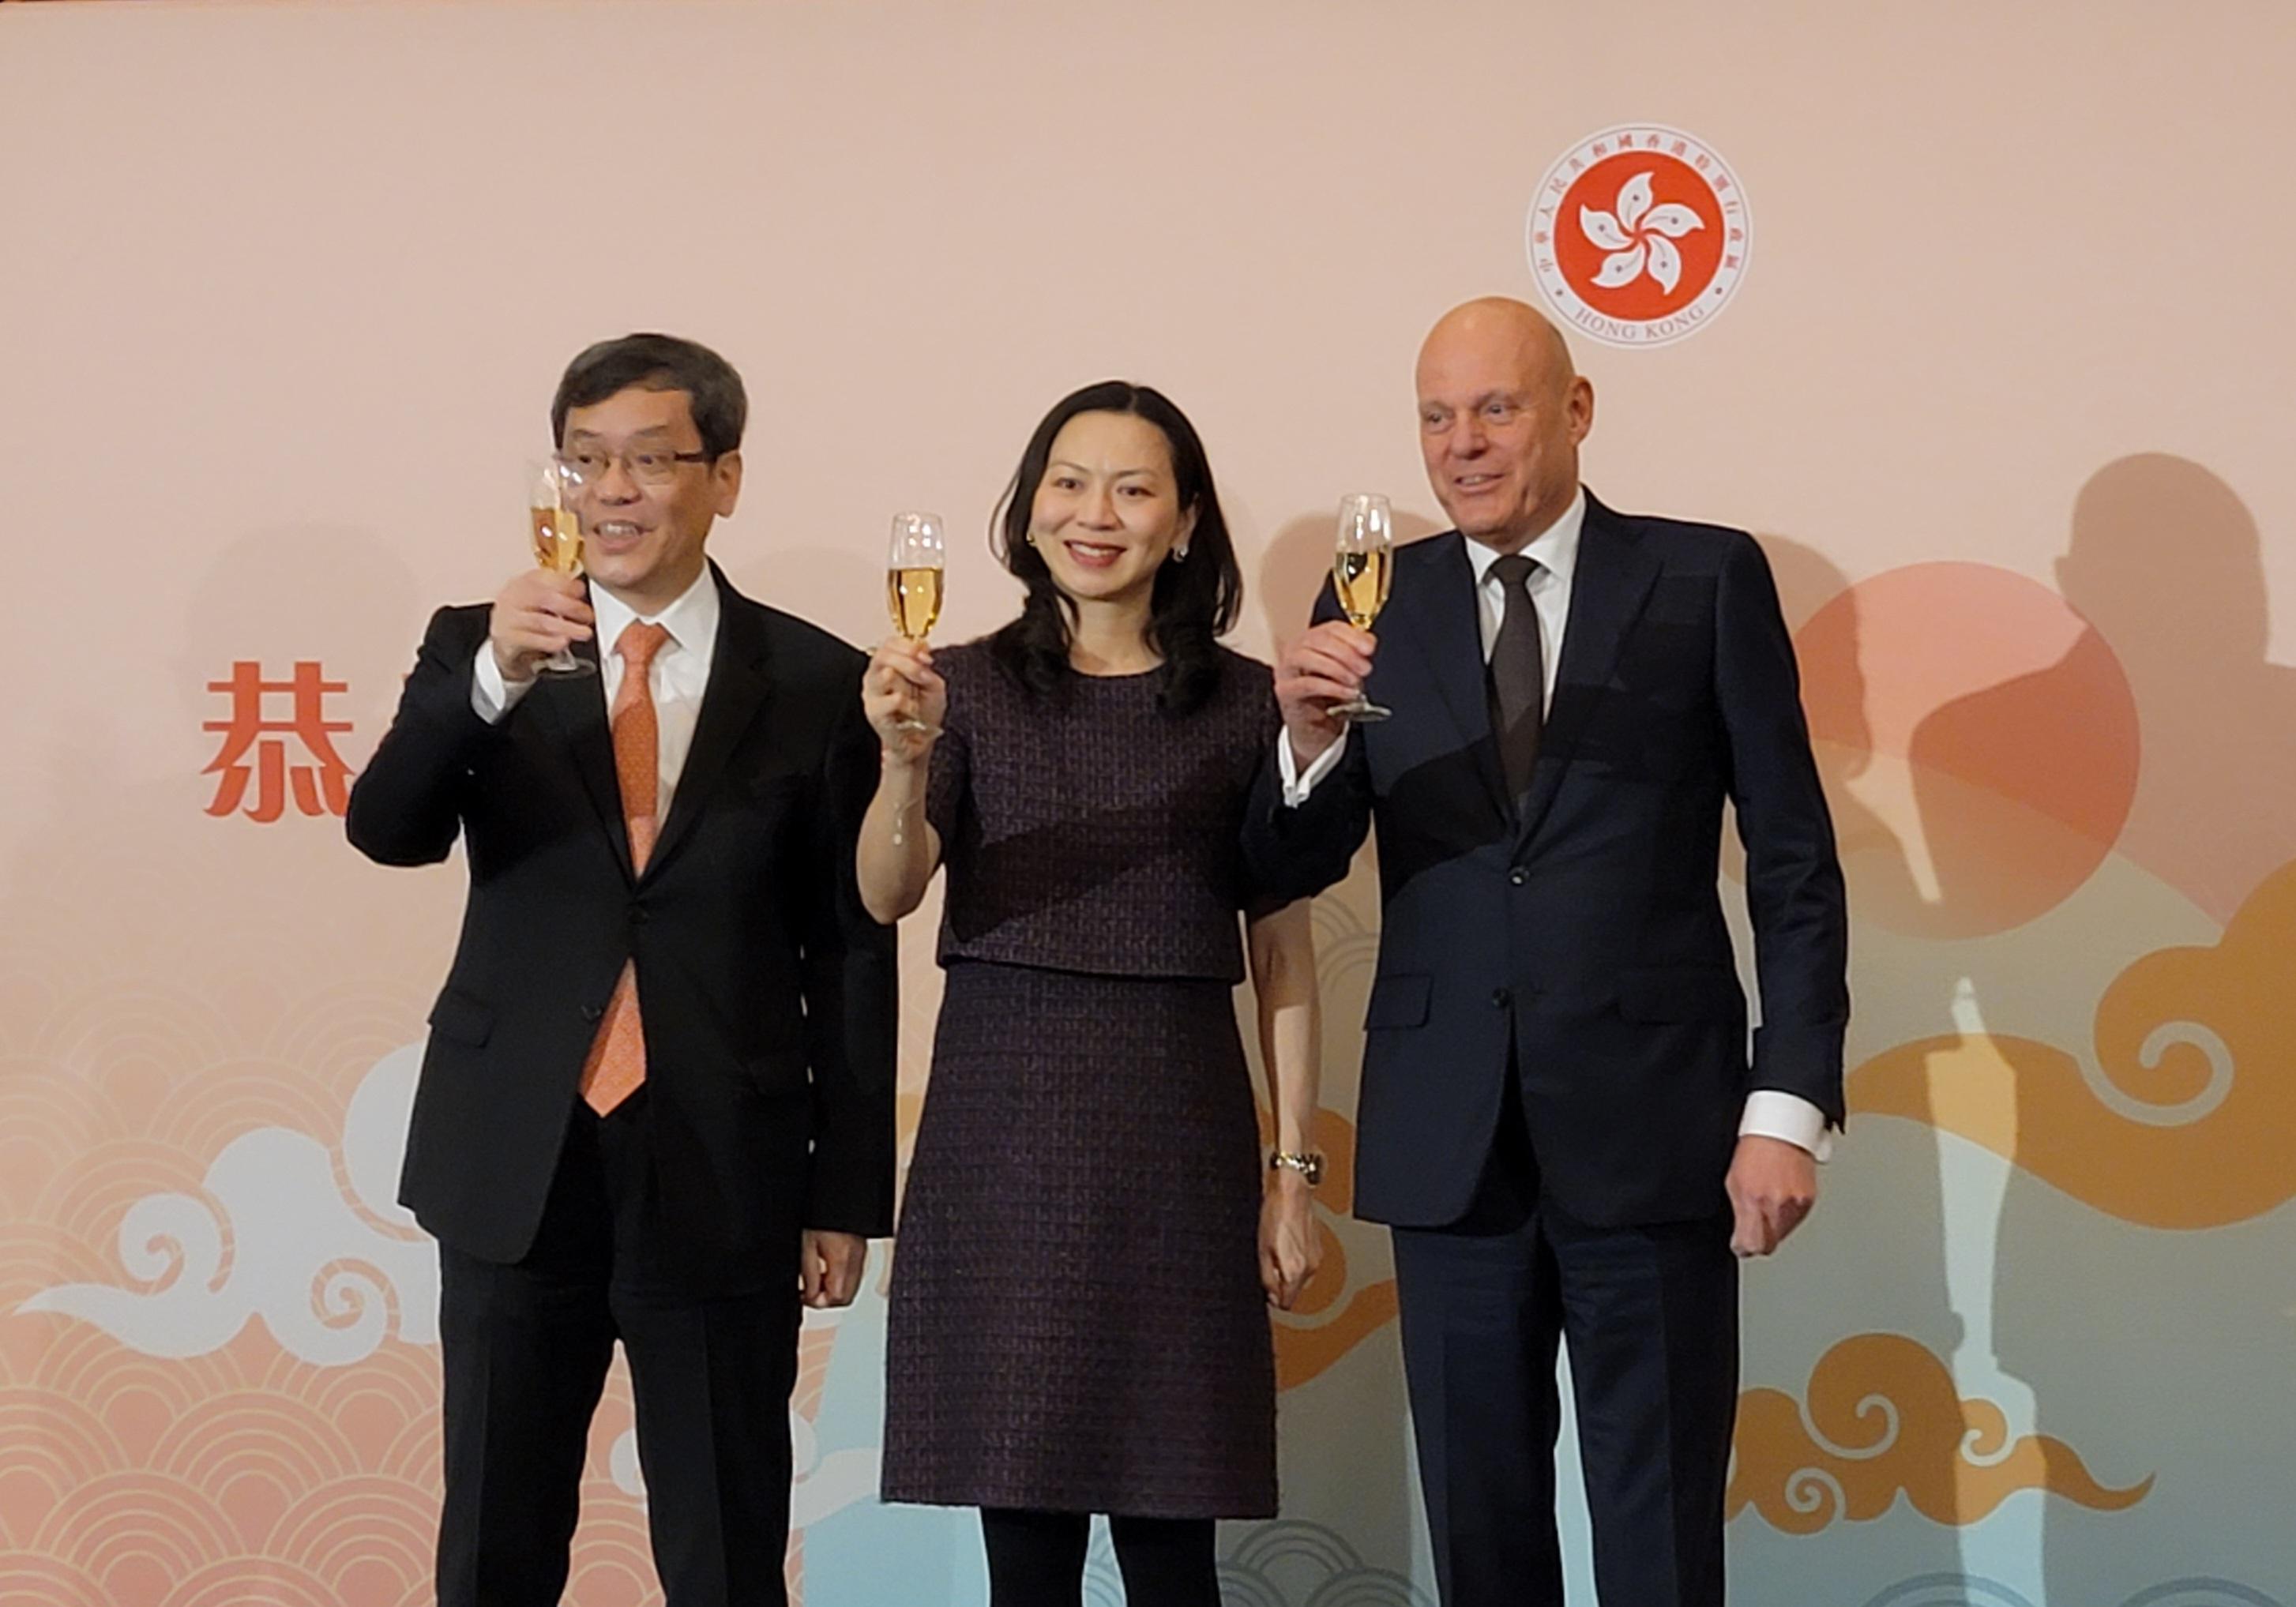 Toasting at the Chinese New Year reception in The Hague, the Netherlands on February 28 were (from left to right) the Ambassador Extraordinary and Plenipotentiary of the People’s Republic of China to the Kingdom of the Netherlands, Mr Tan Jian; the Deputy Representative of the Hong Kong Economic and Trade Office in Brussels, Miss Fiona Li; and the Chairman of the Netherlands Hong Kong Business Association, Mr Hans Poulis.